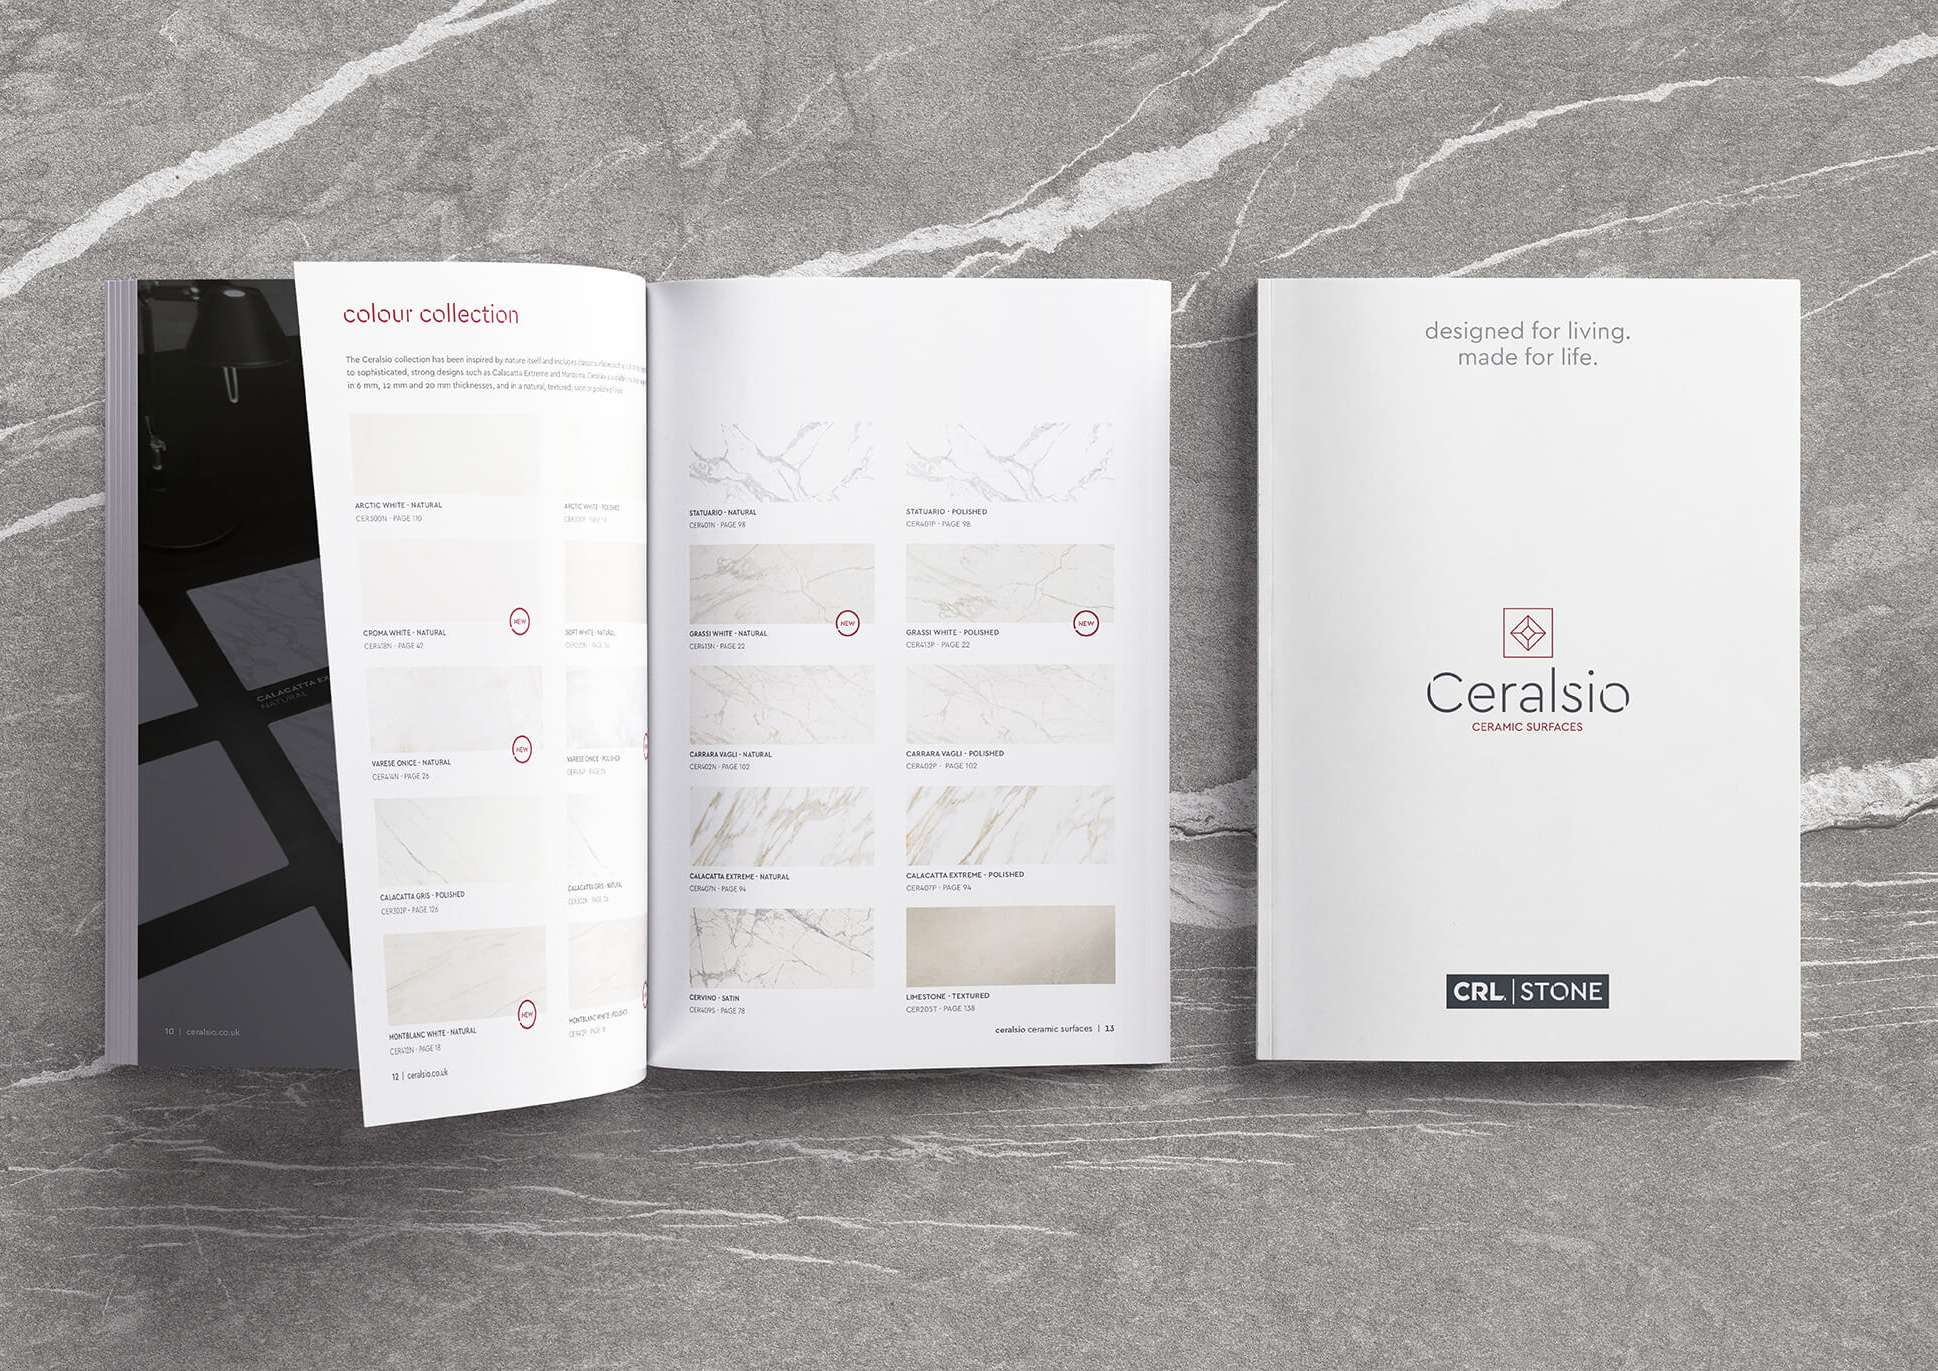 New styles and thicknesses star in latest Ceralsio brochure